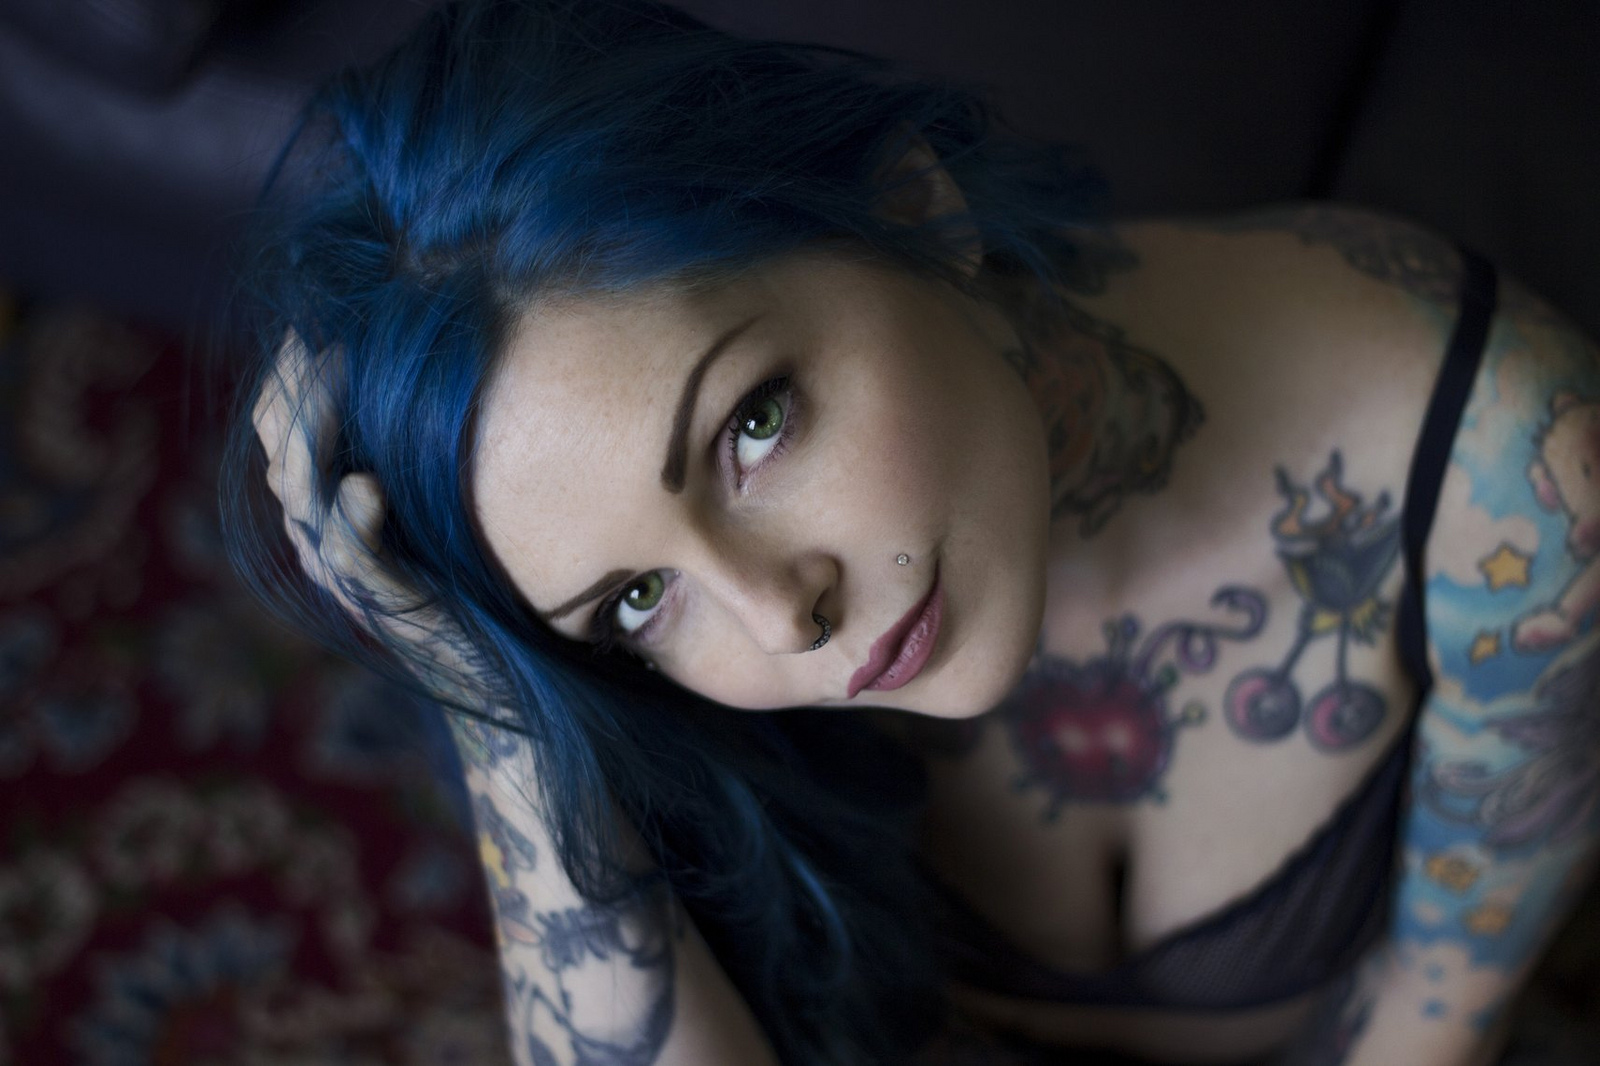 Emmy suicide leaked